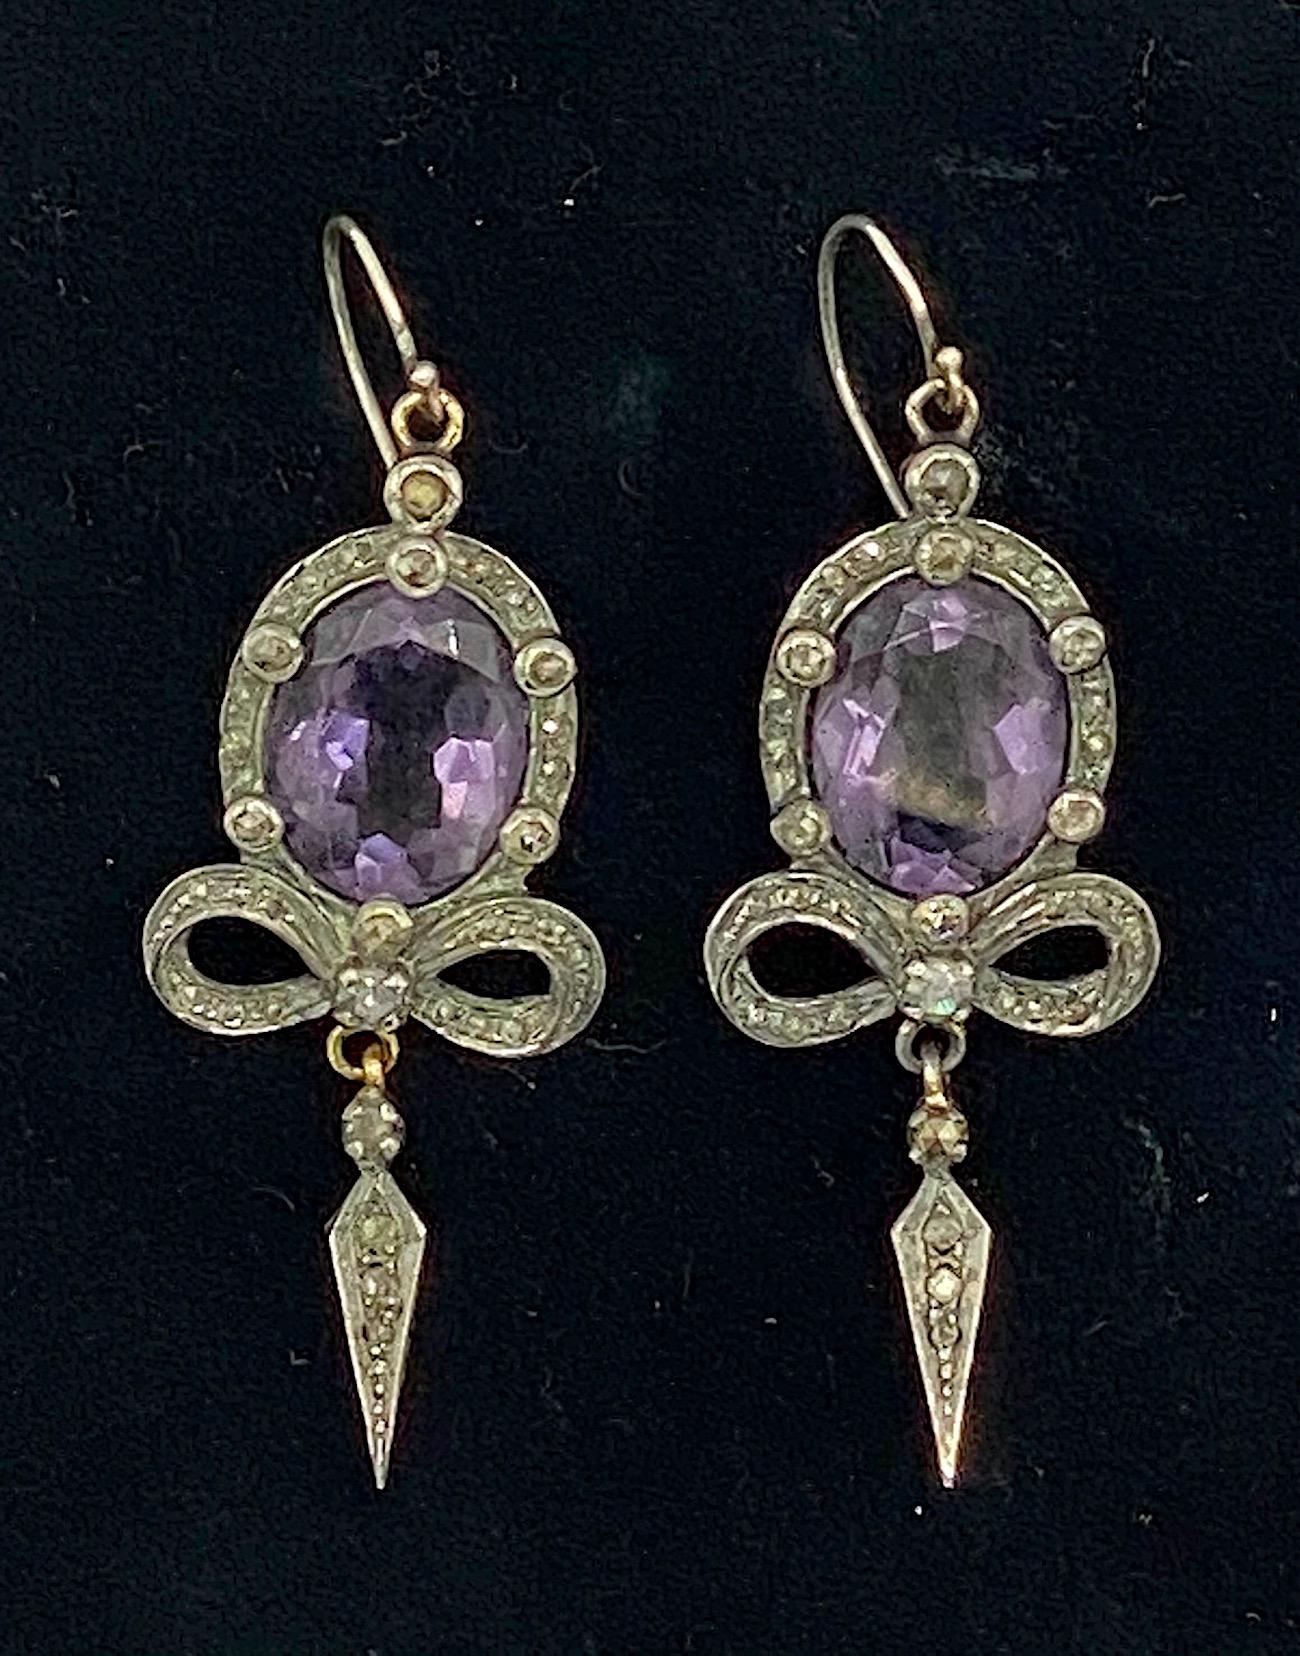 A charming pair of antique Victorian Edwardian pair of sterling silver, amethyst and diamond pendant earrings. The earrings have a French wire for pierced ears. The earrings are sterling sliver and feature a large oval amethyst stone 11.5 mm wide,